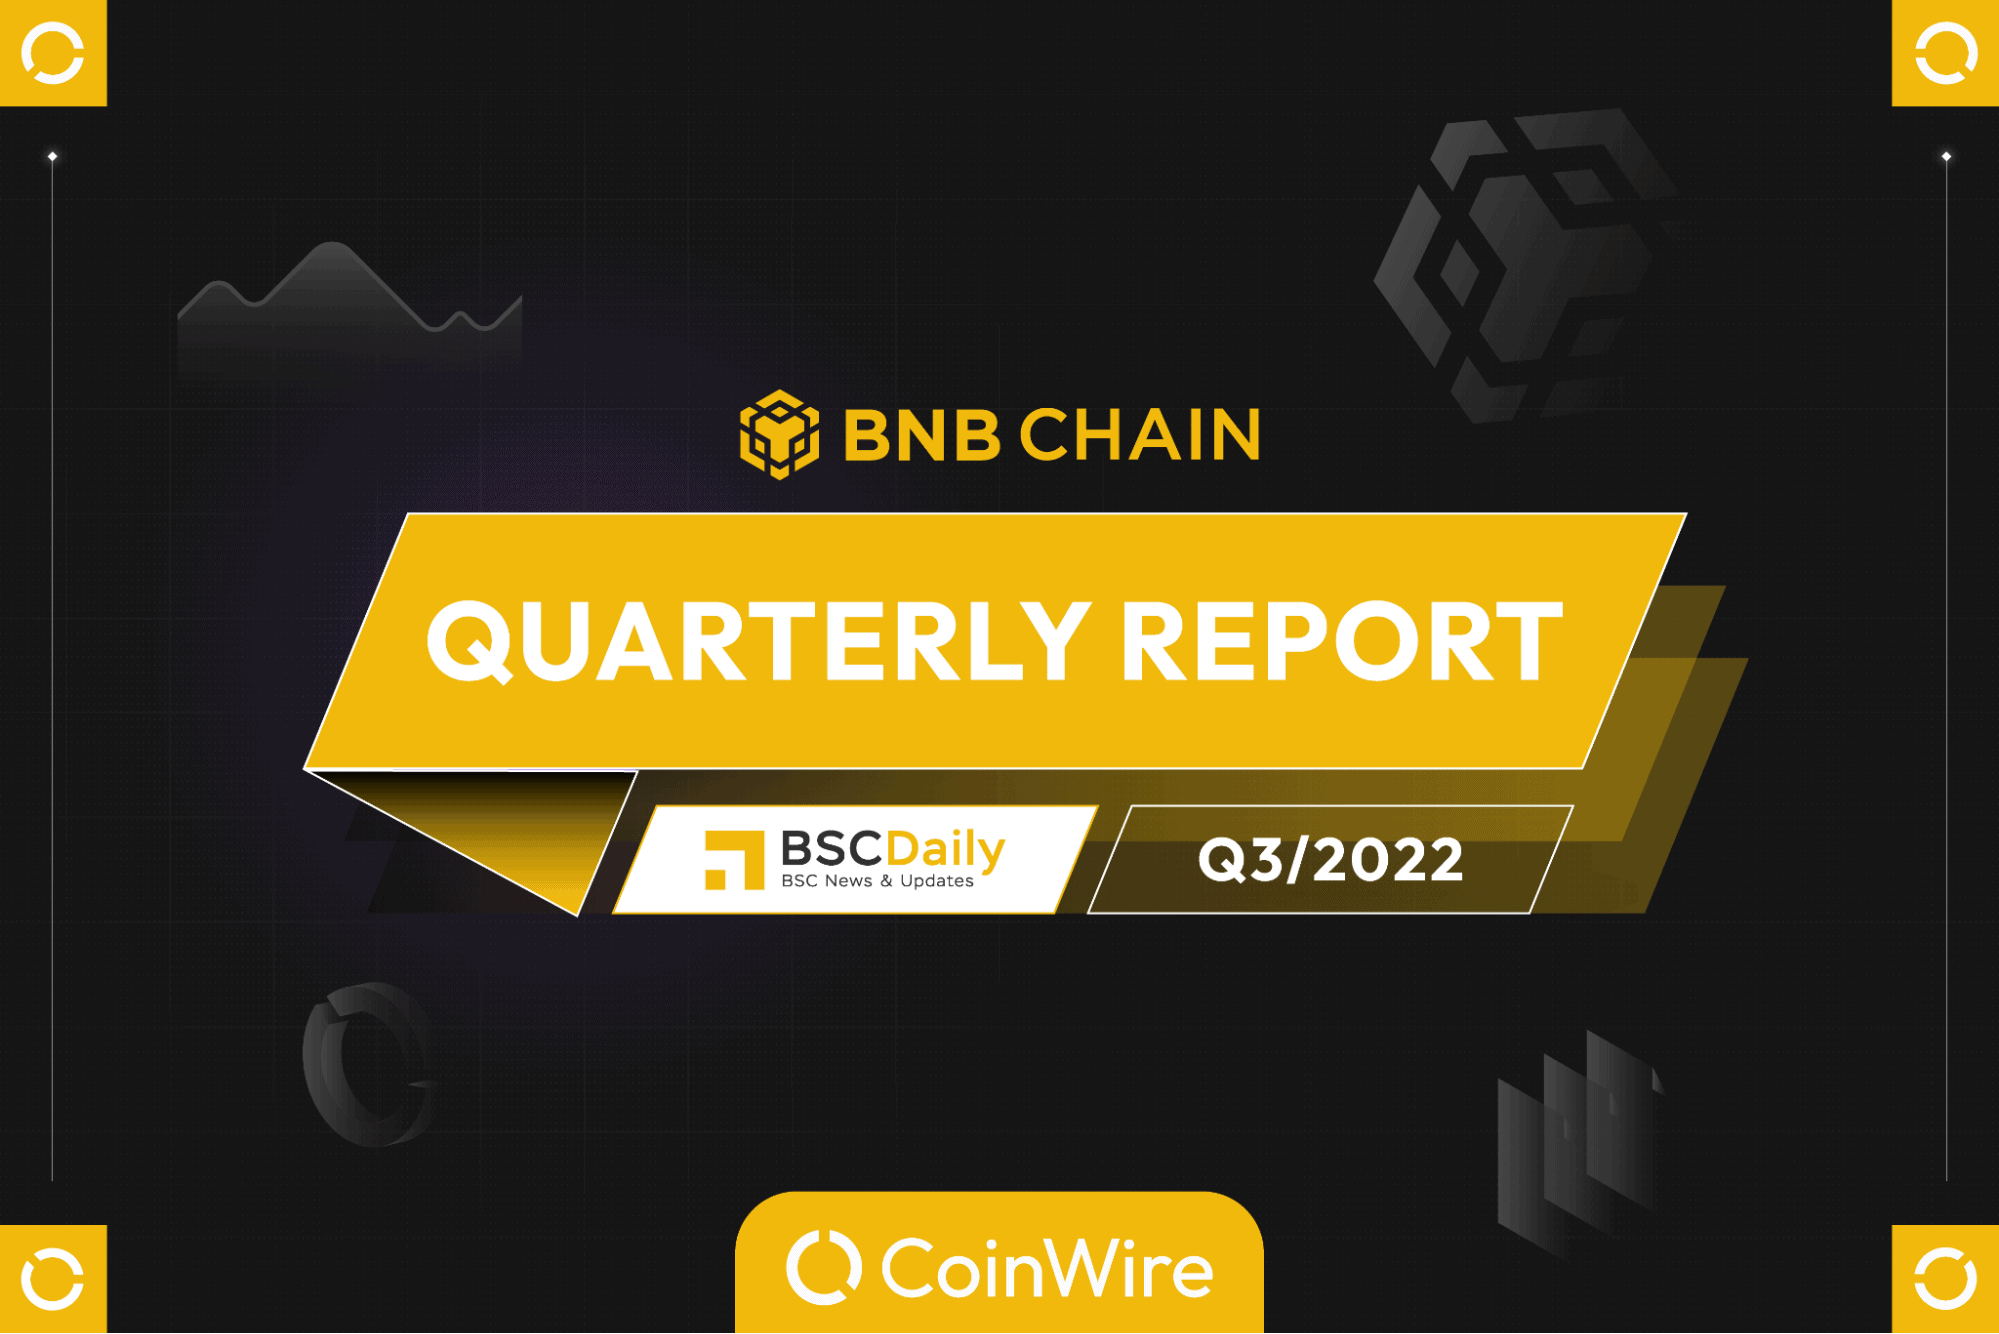 Bnb Chain Bao Cao Quy 3 2022 Anh Bia